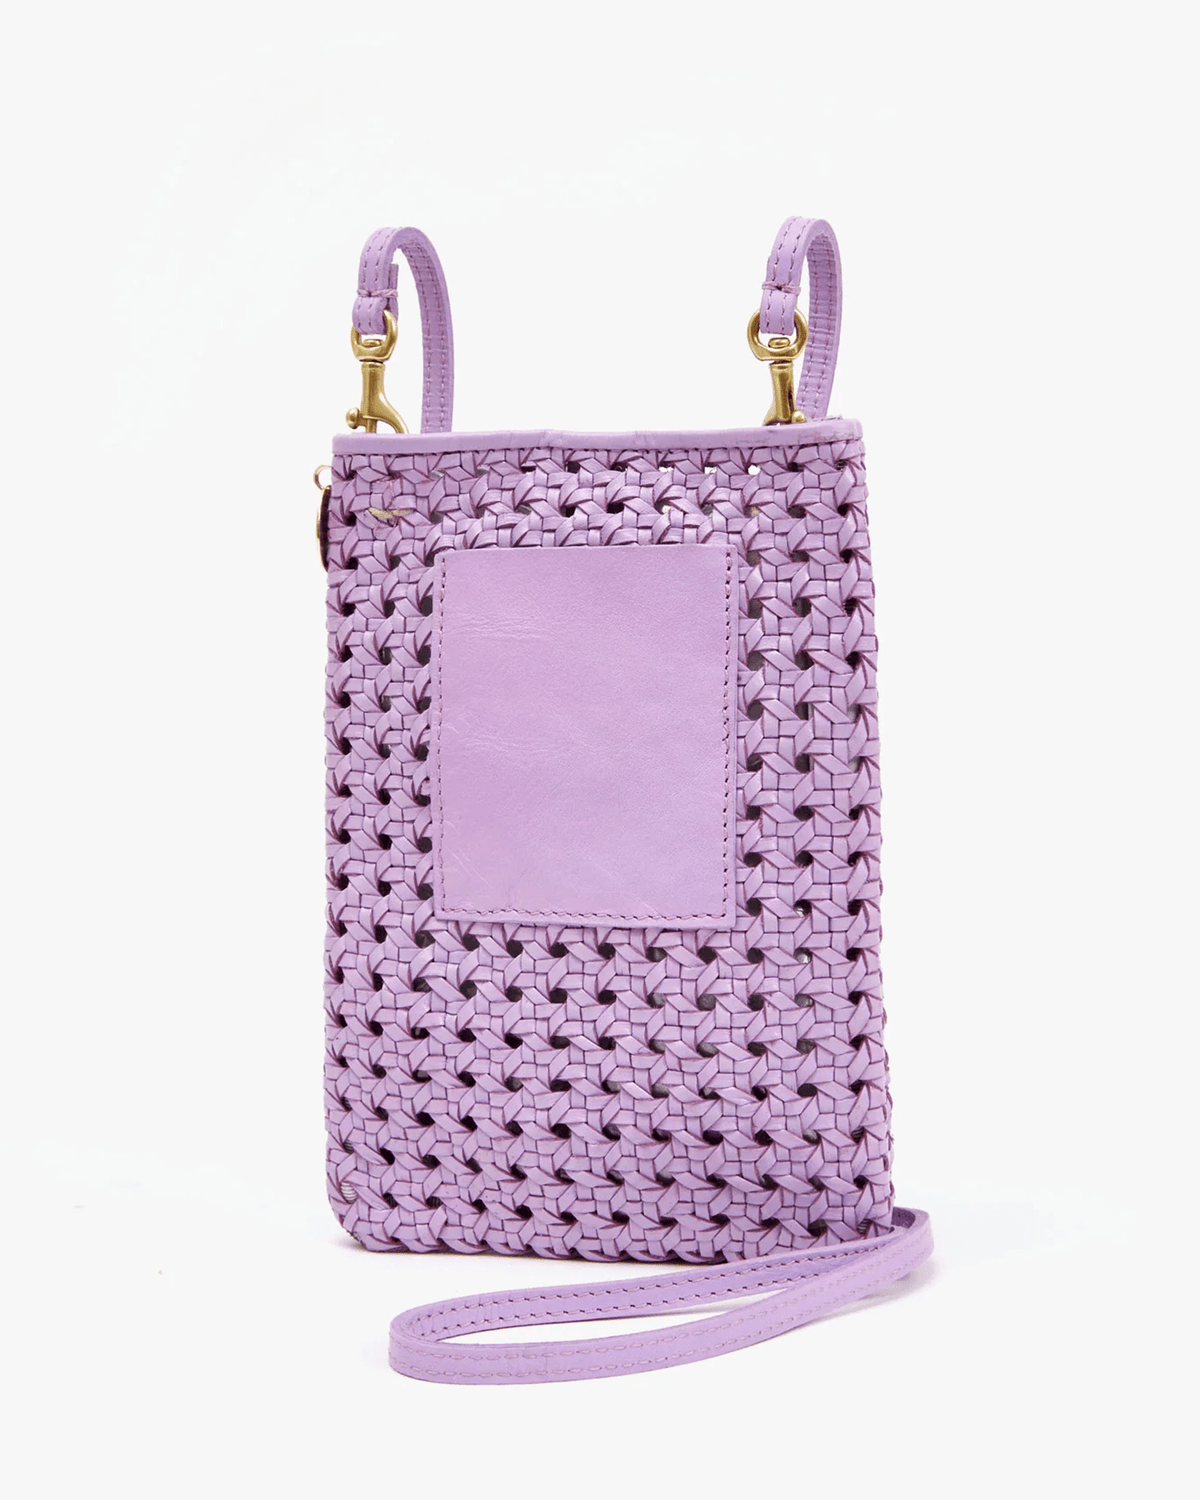 Explore Rattan Poche in Lilac Clare V. as well as other. Shop our online  store for savings